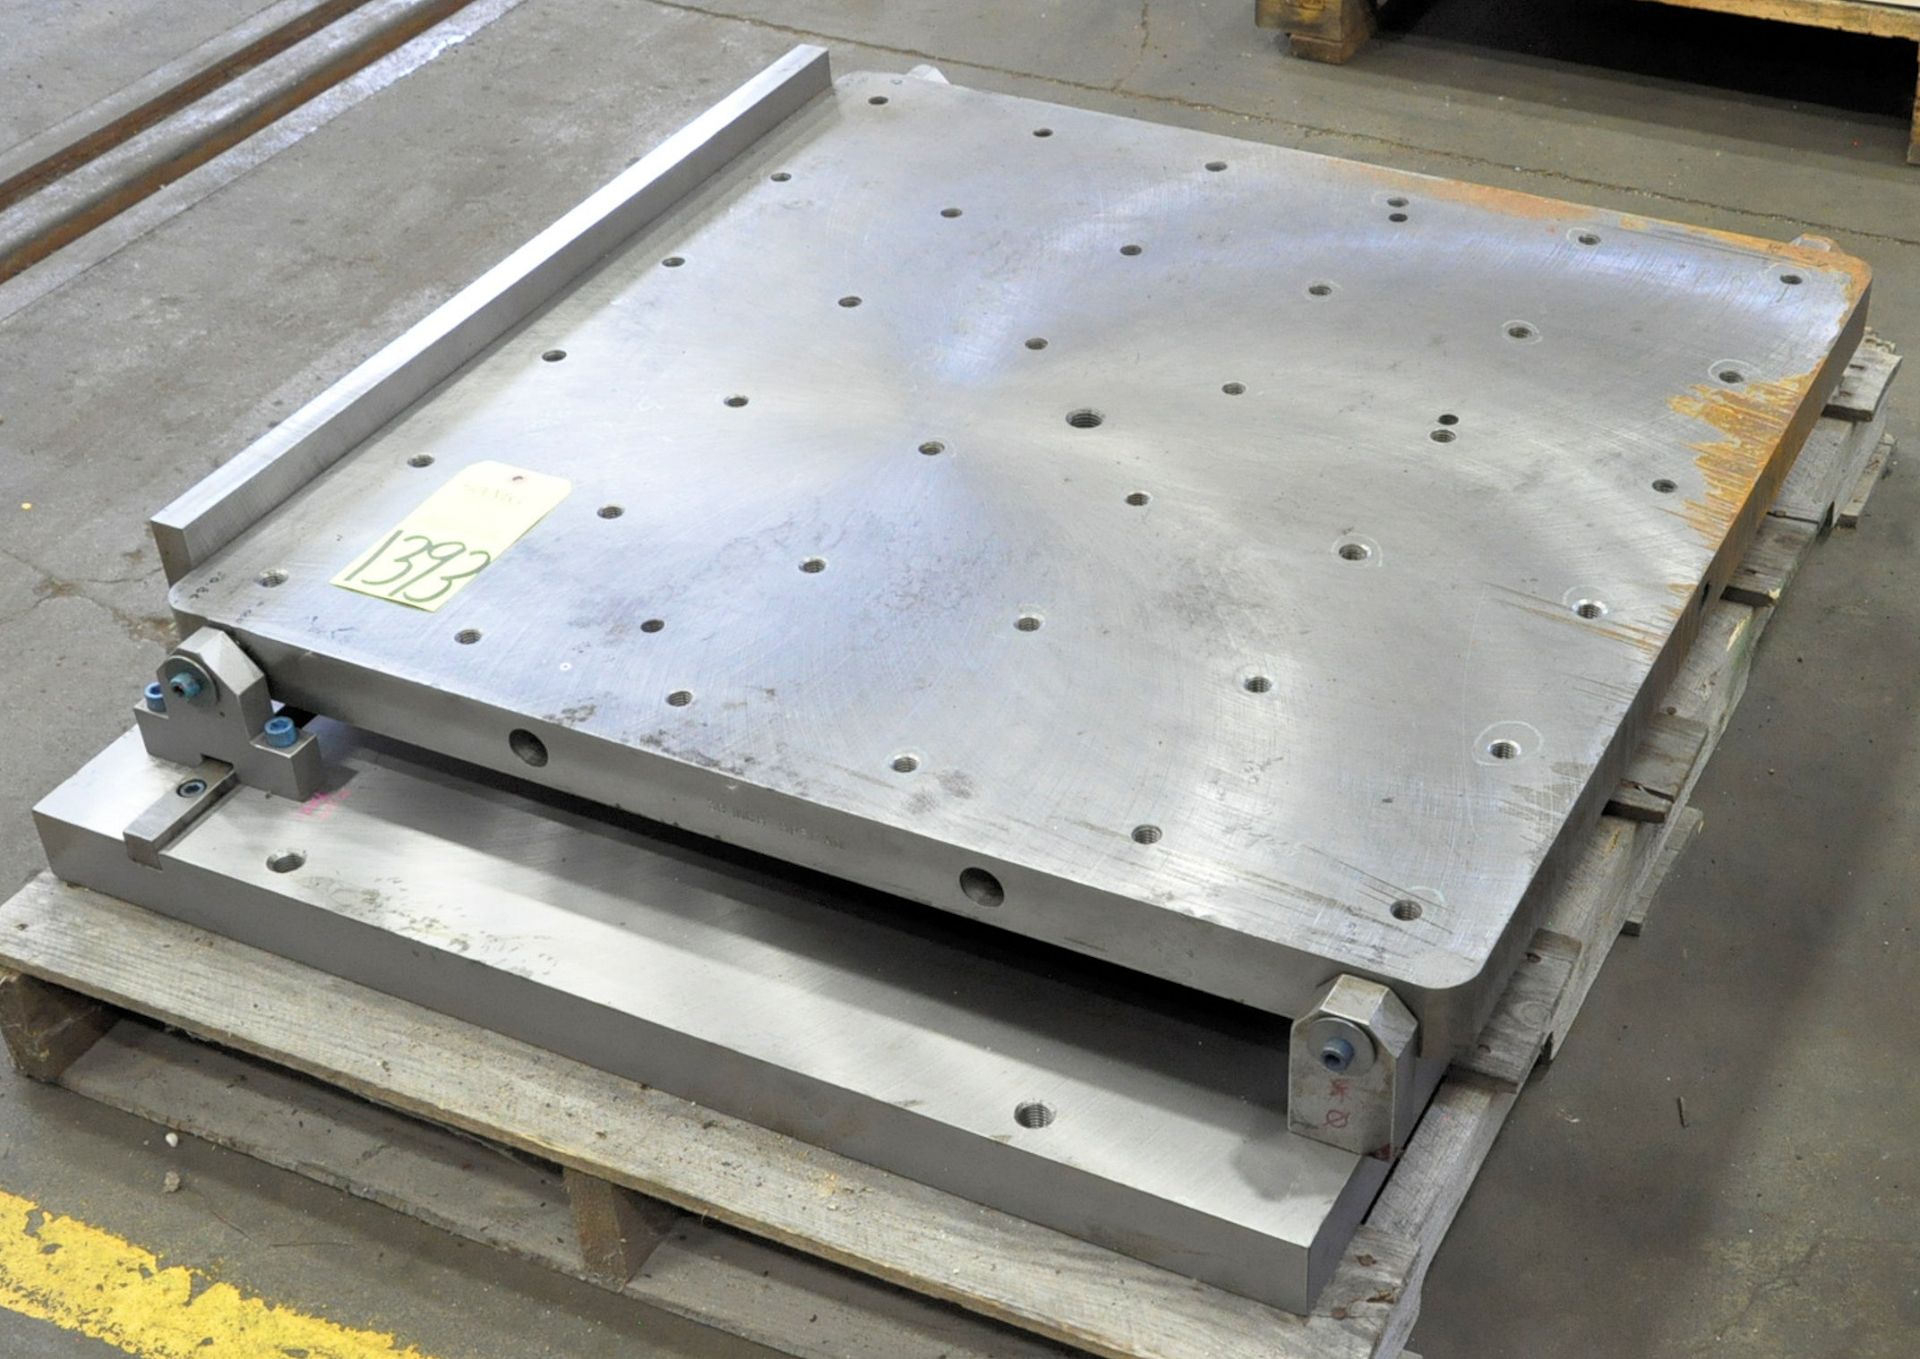 34" x 34" Drilled and Tapped Sine Plate, (G-18), (Yellow Tag)